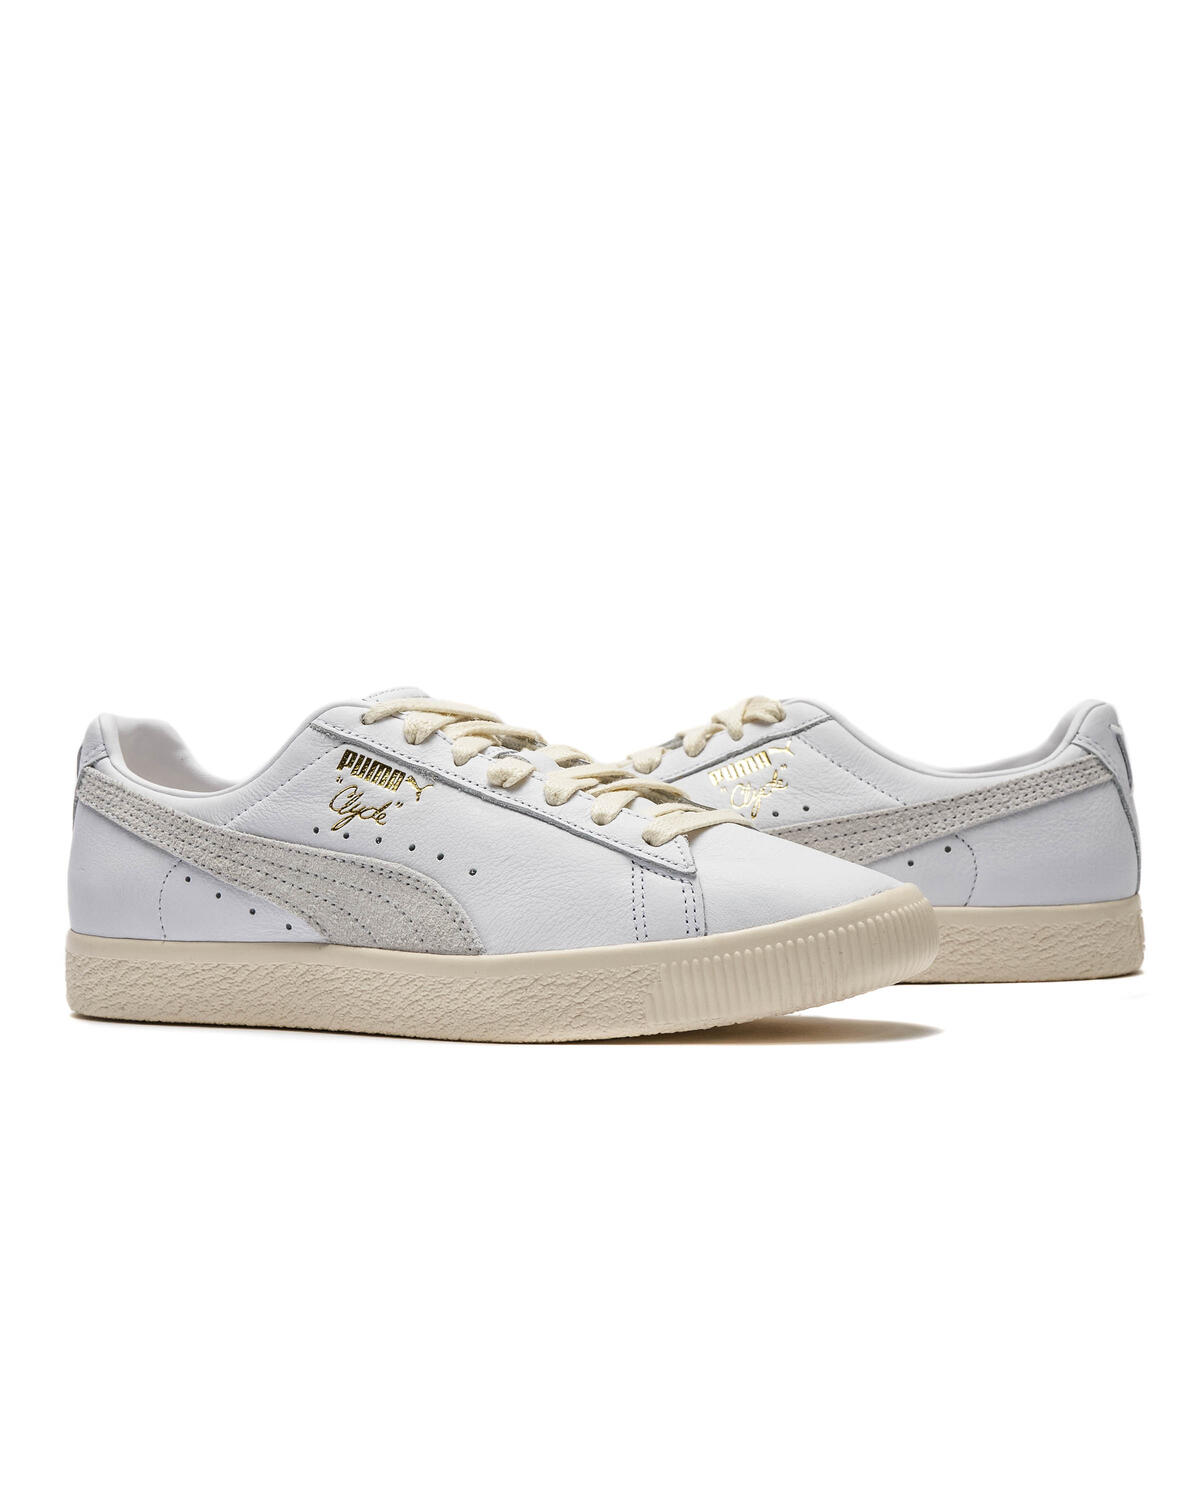 Puma Clyde Base | 390091-01 | AFEW STORE